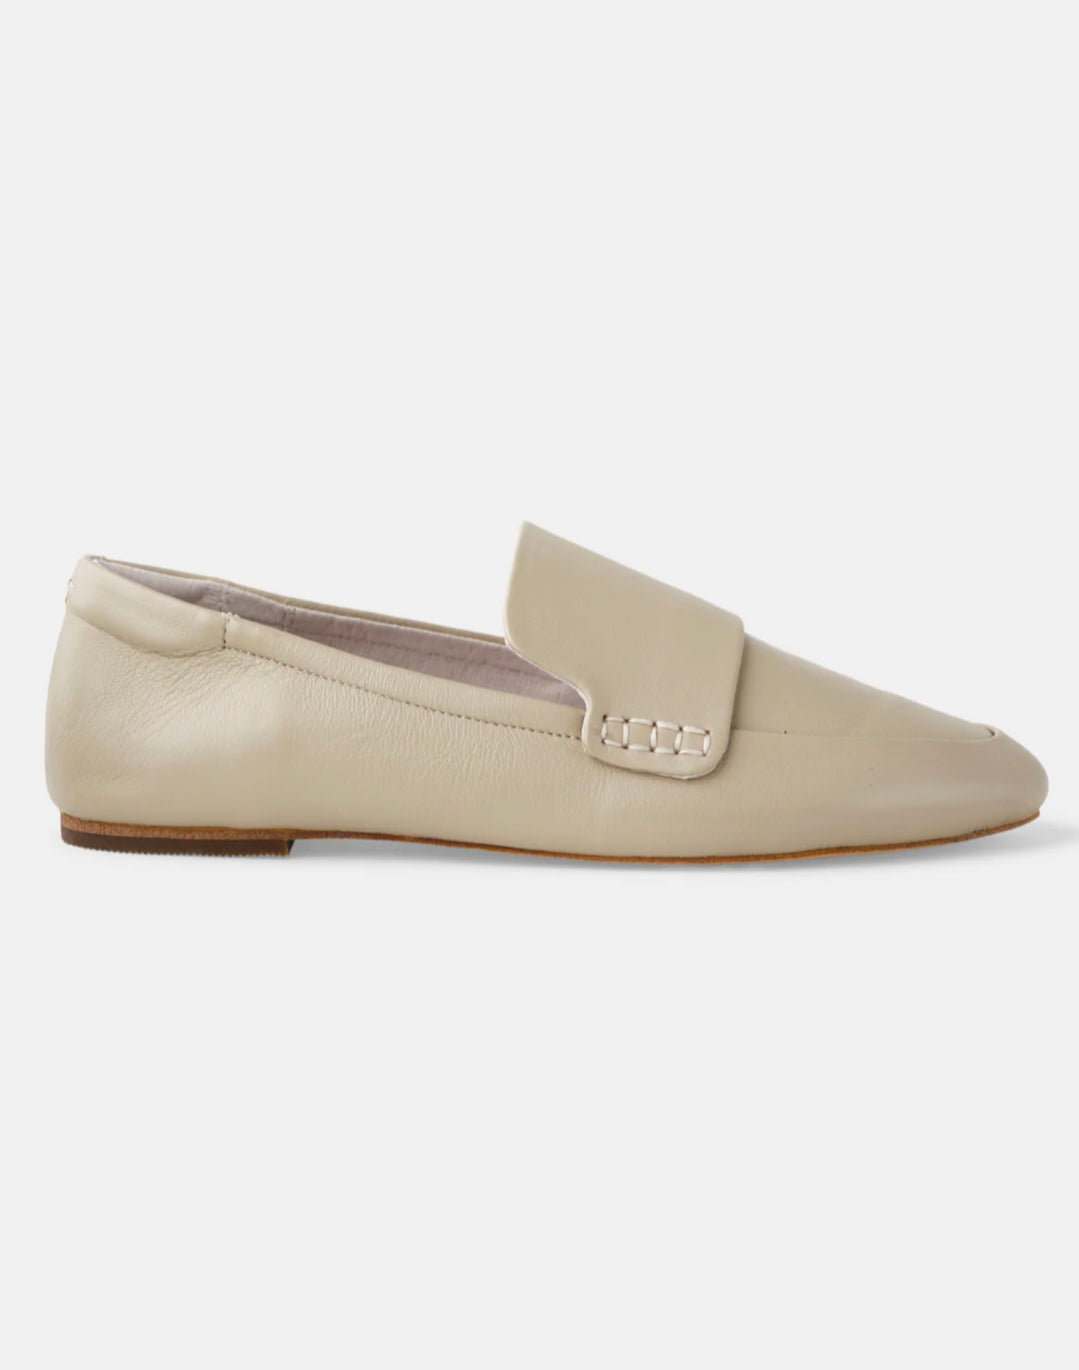 Dutch Leather Loafer WAS $170